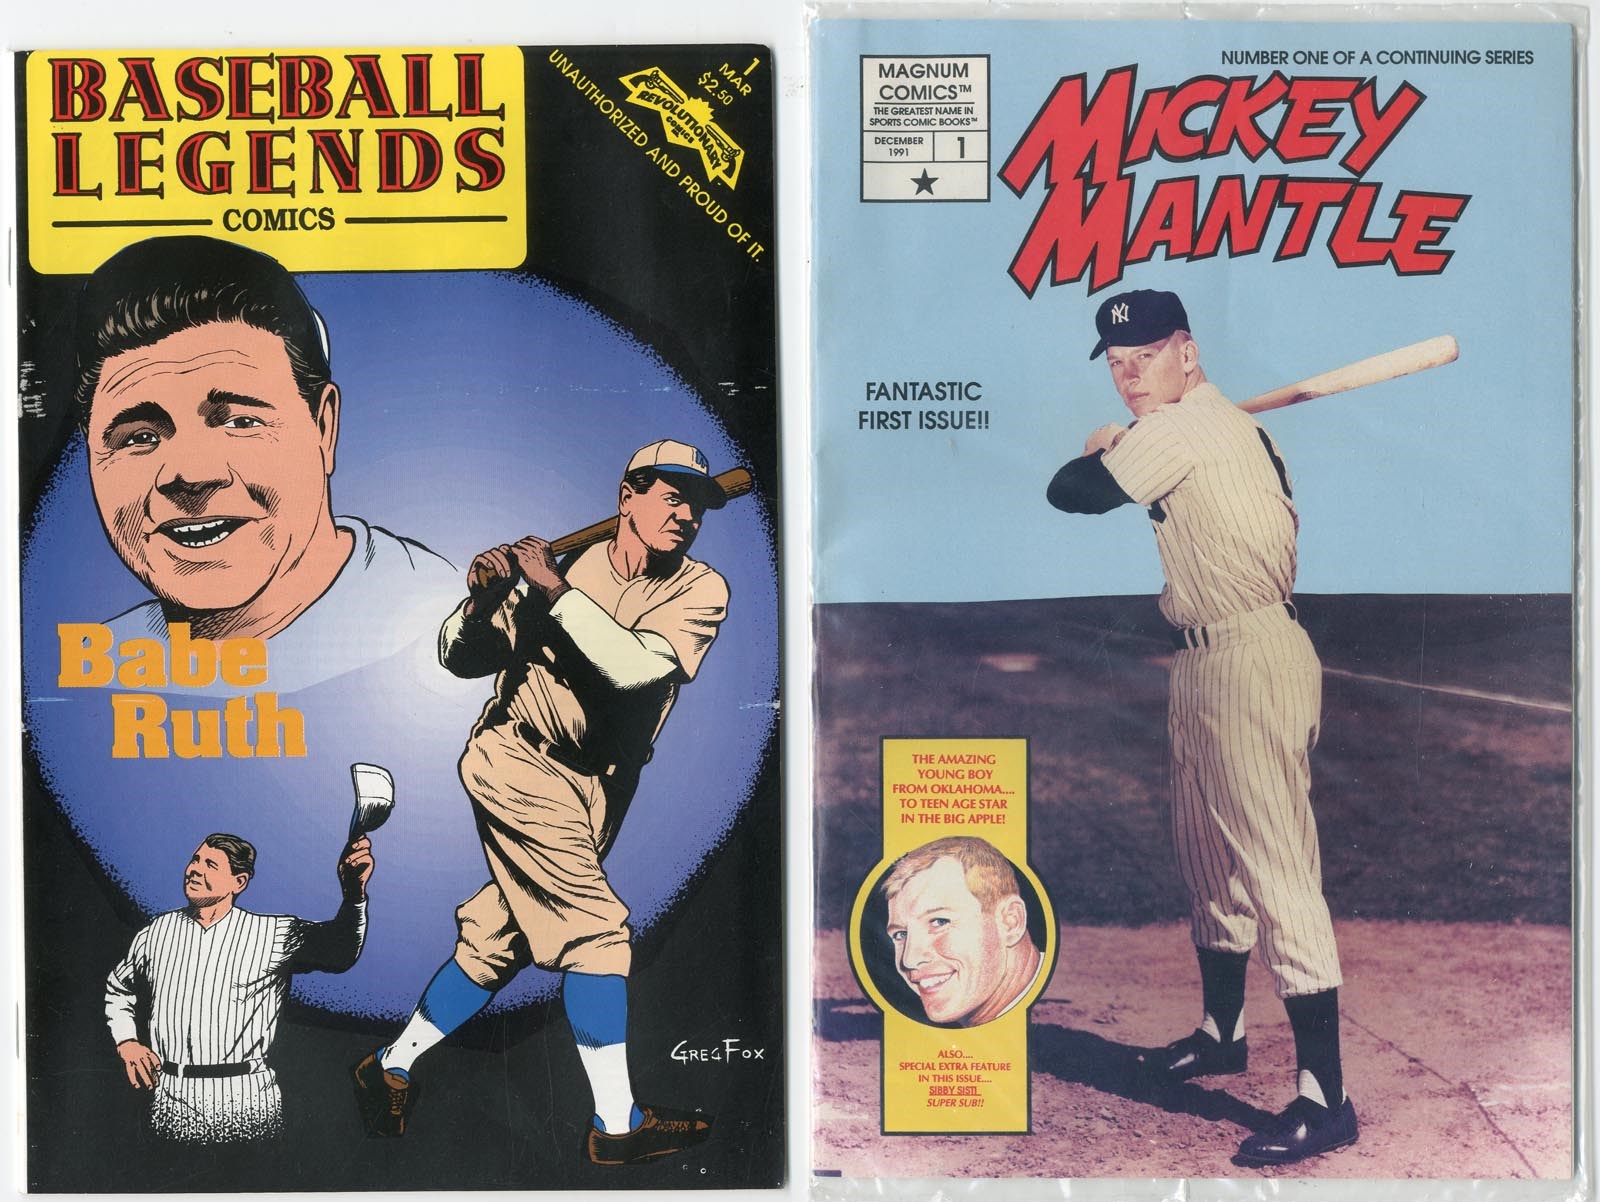 Baseball Publications - Huge Find of Mickey Mantle & Babe Ruth Comic Book (1,100 books)